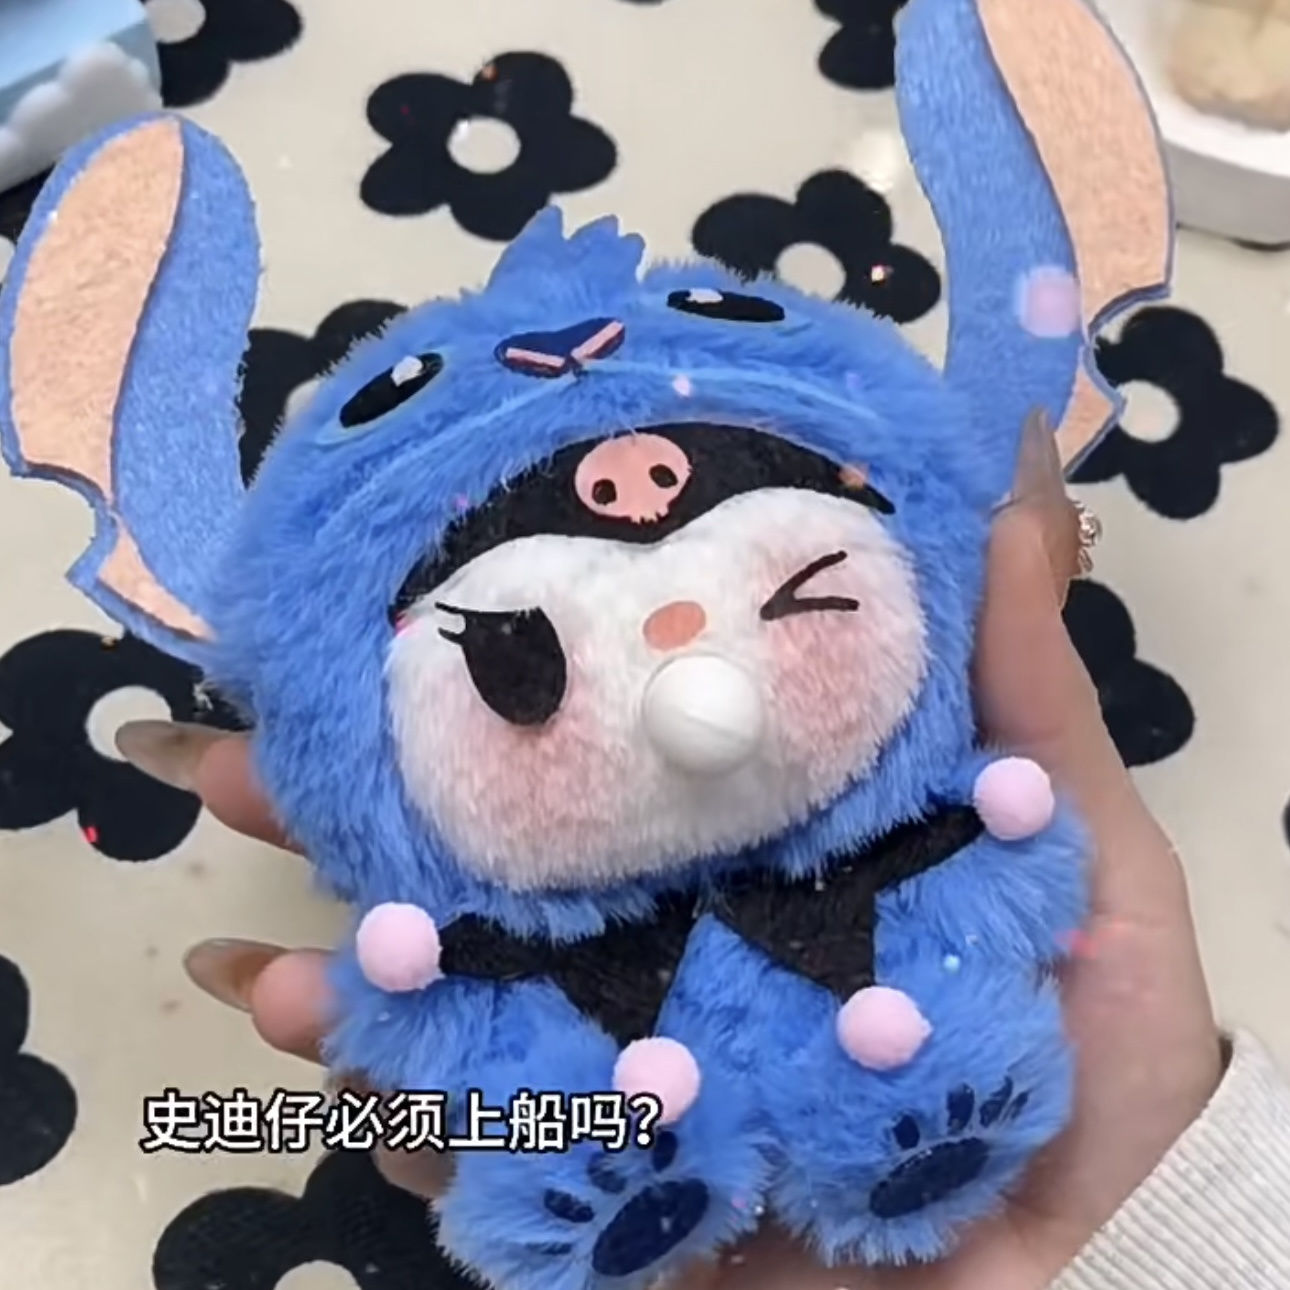 Year of the Dragon mascot DIY material package that can spit bubbles as a New Year gift for girlfriend Stitch Kuromi